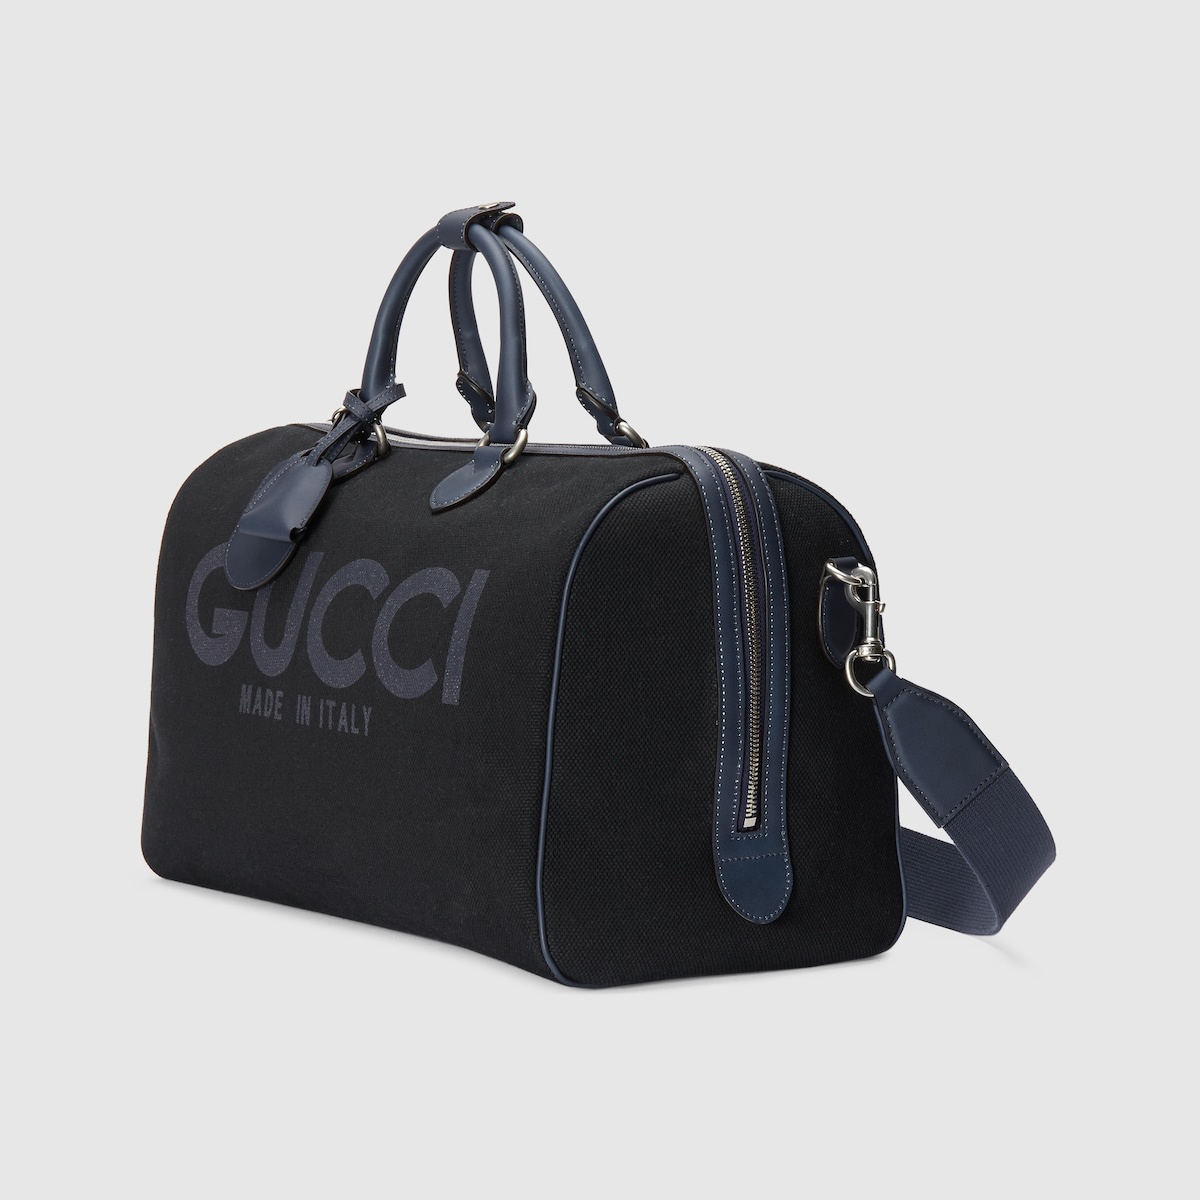 Large duffle bag with Gucci print - 1